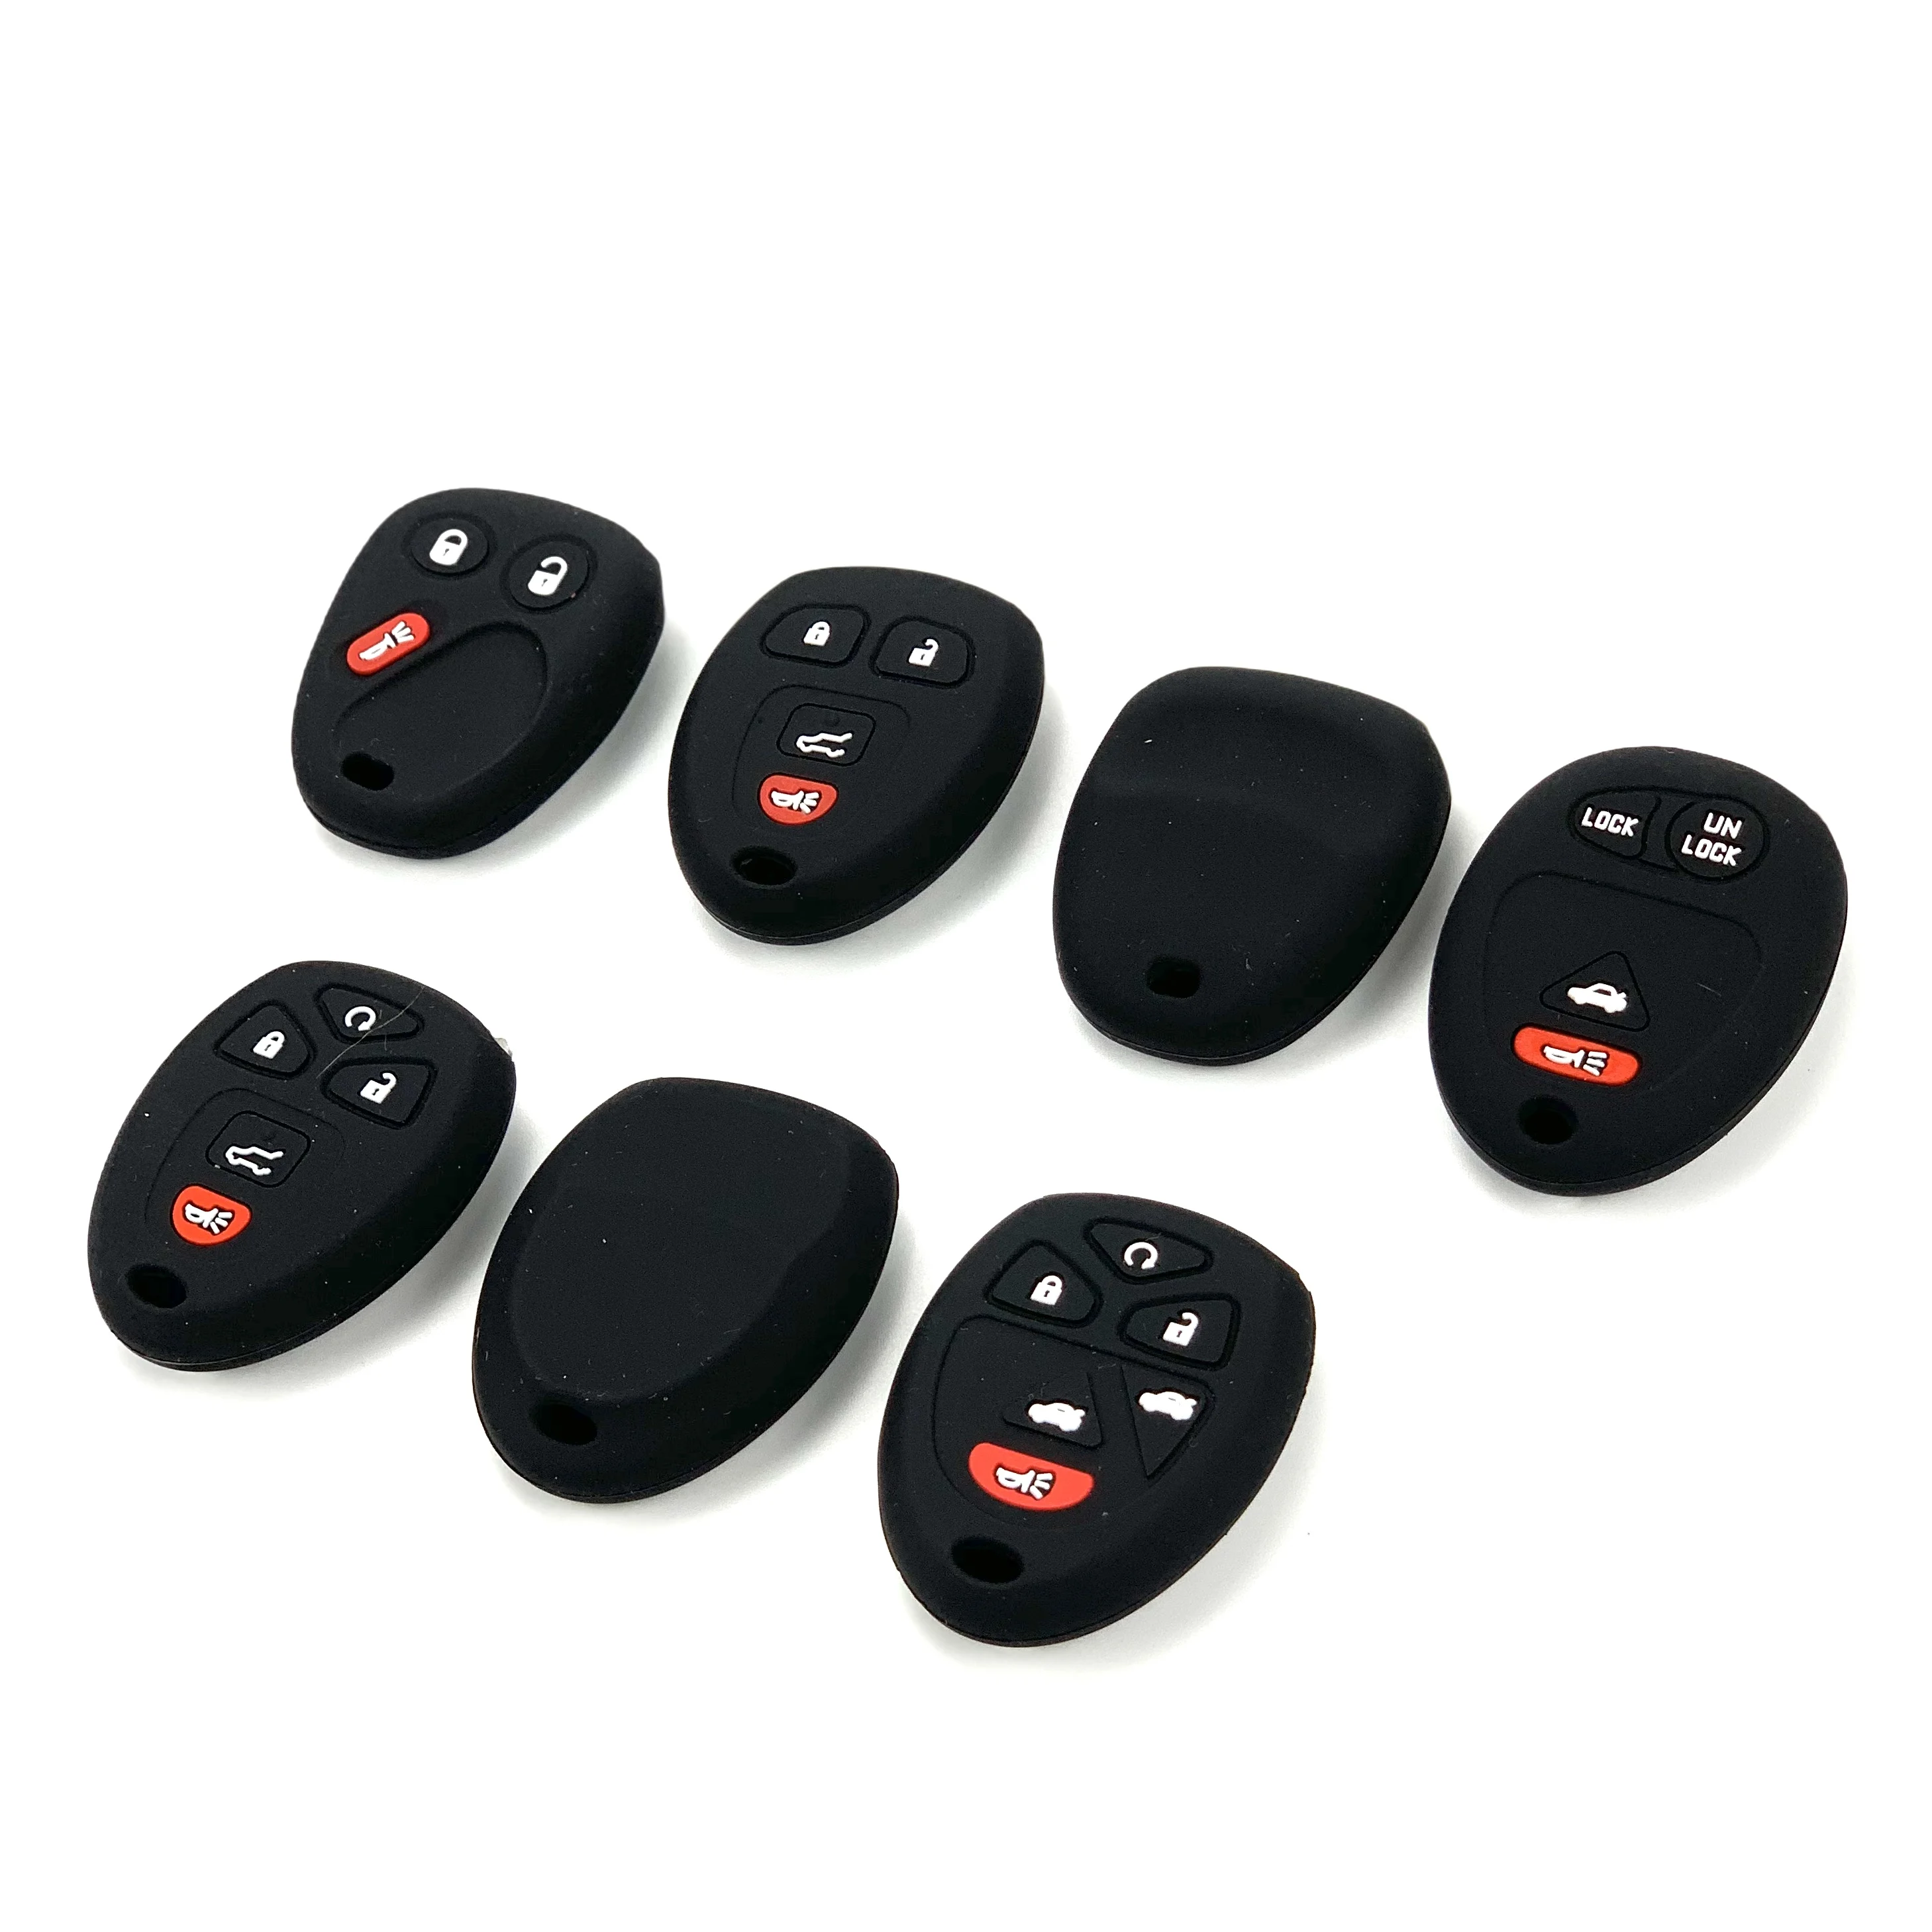 Silicone car Key Case cover set shell For Chevrolet tahoe yukon suburban For GMC for Cadillac for Buick 6 button key cover